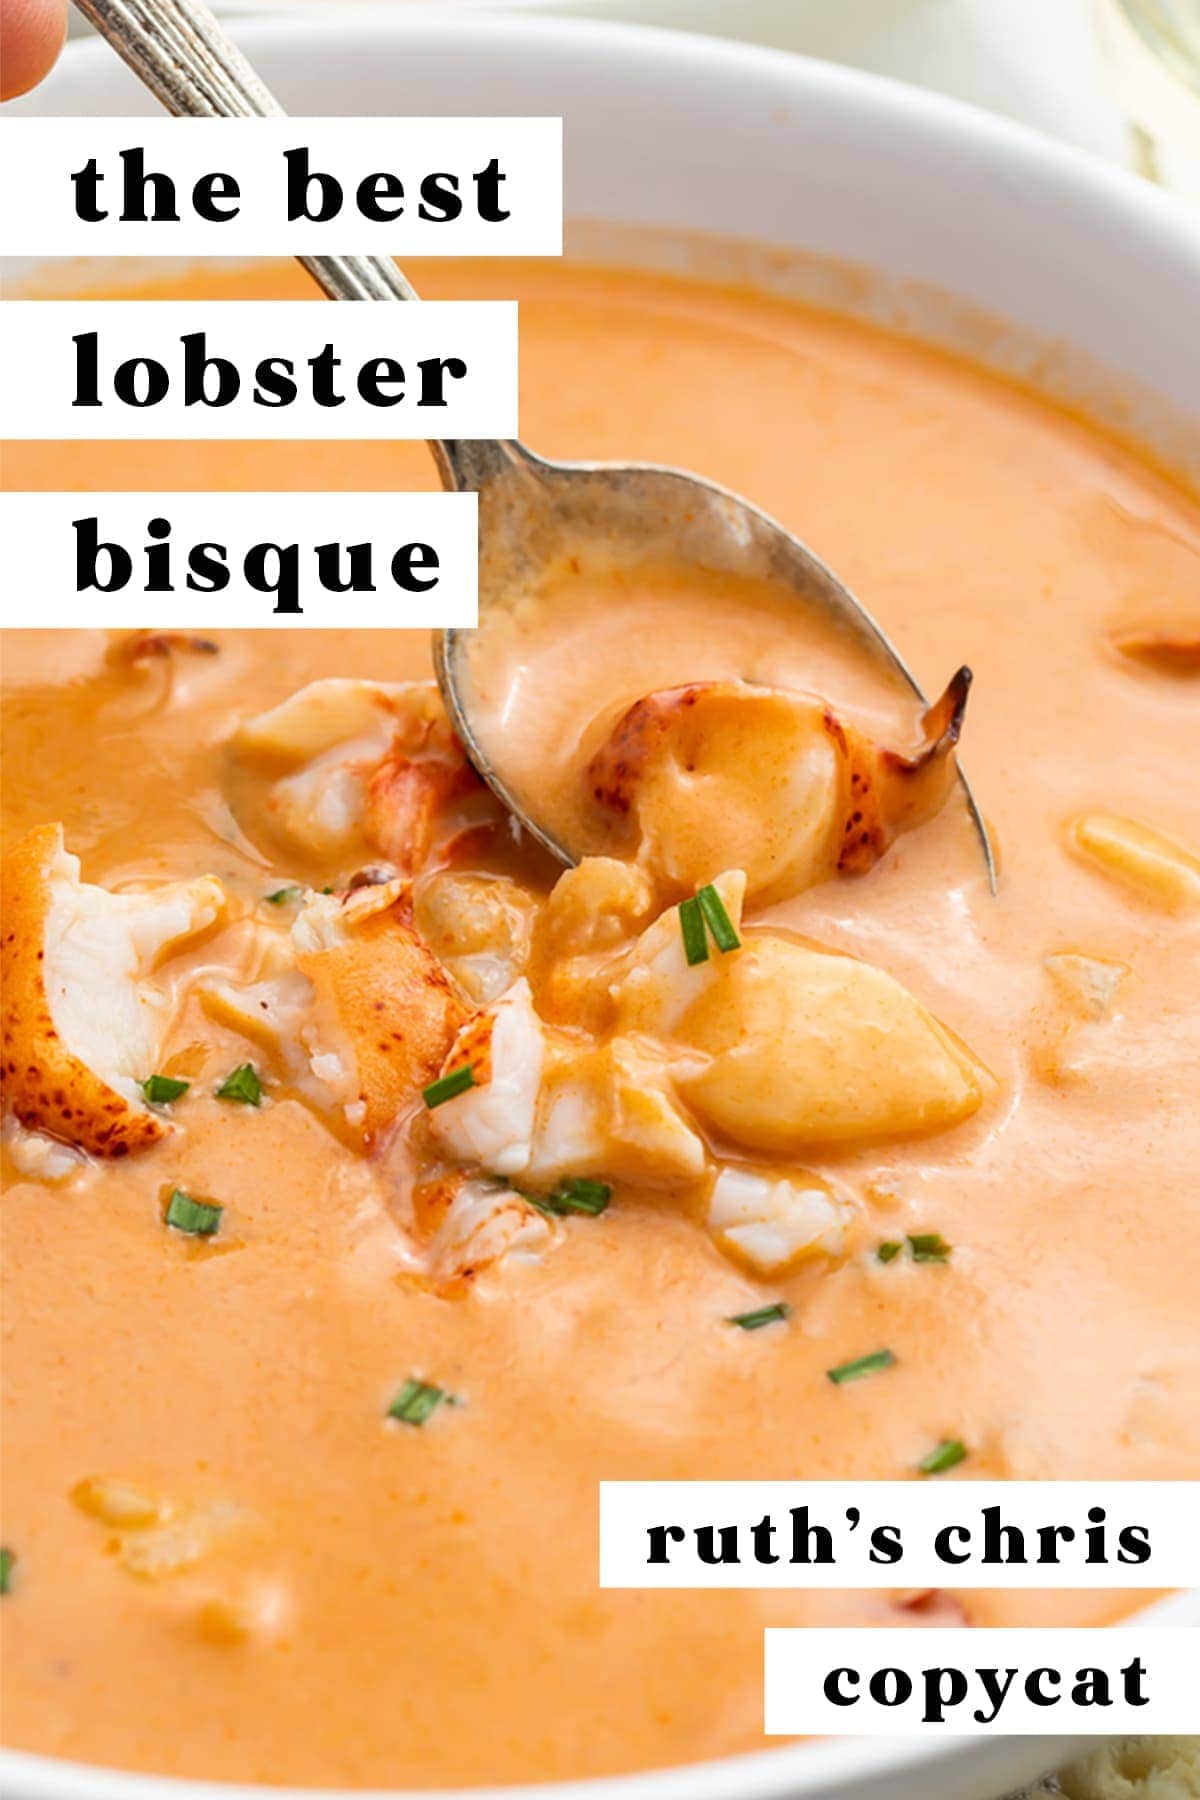 The Best Lobster Bisque (Ruth's Chris Copycat Recipe) - 40 Aprons